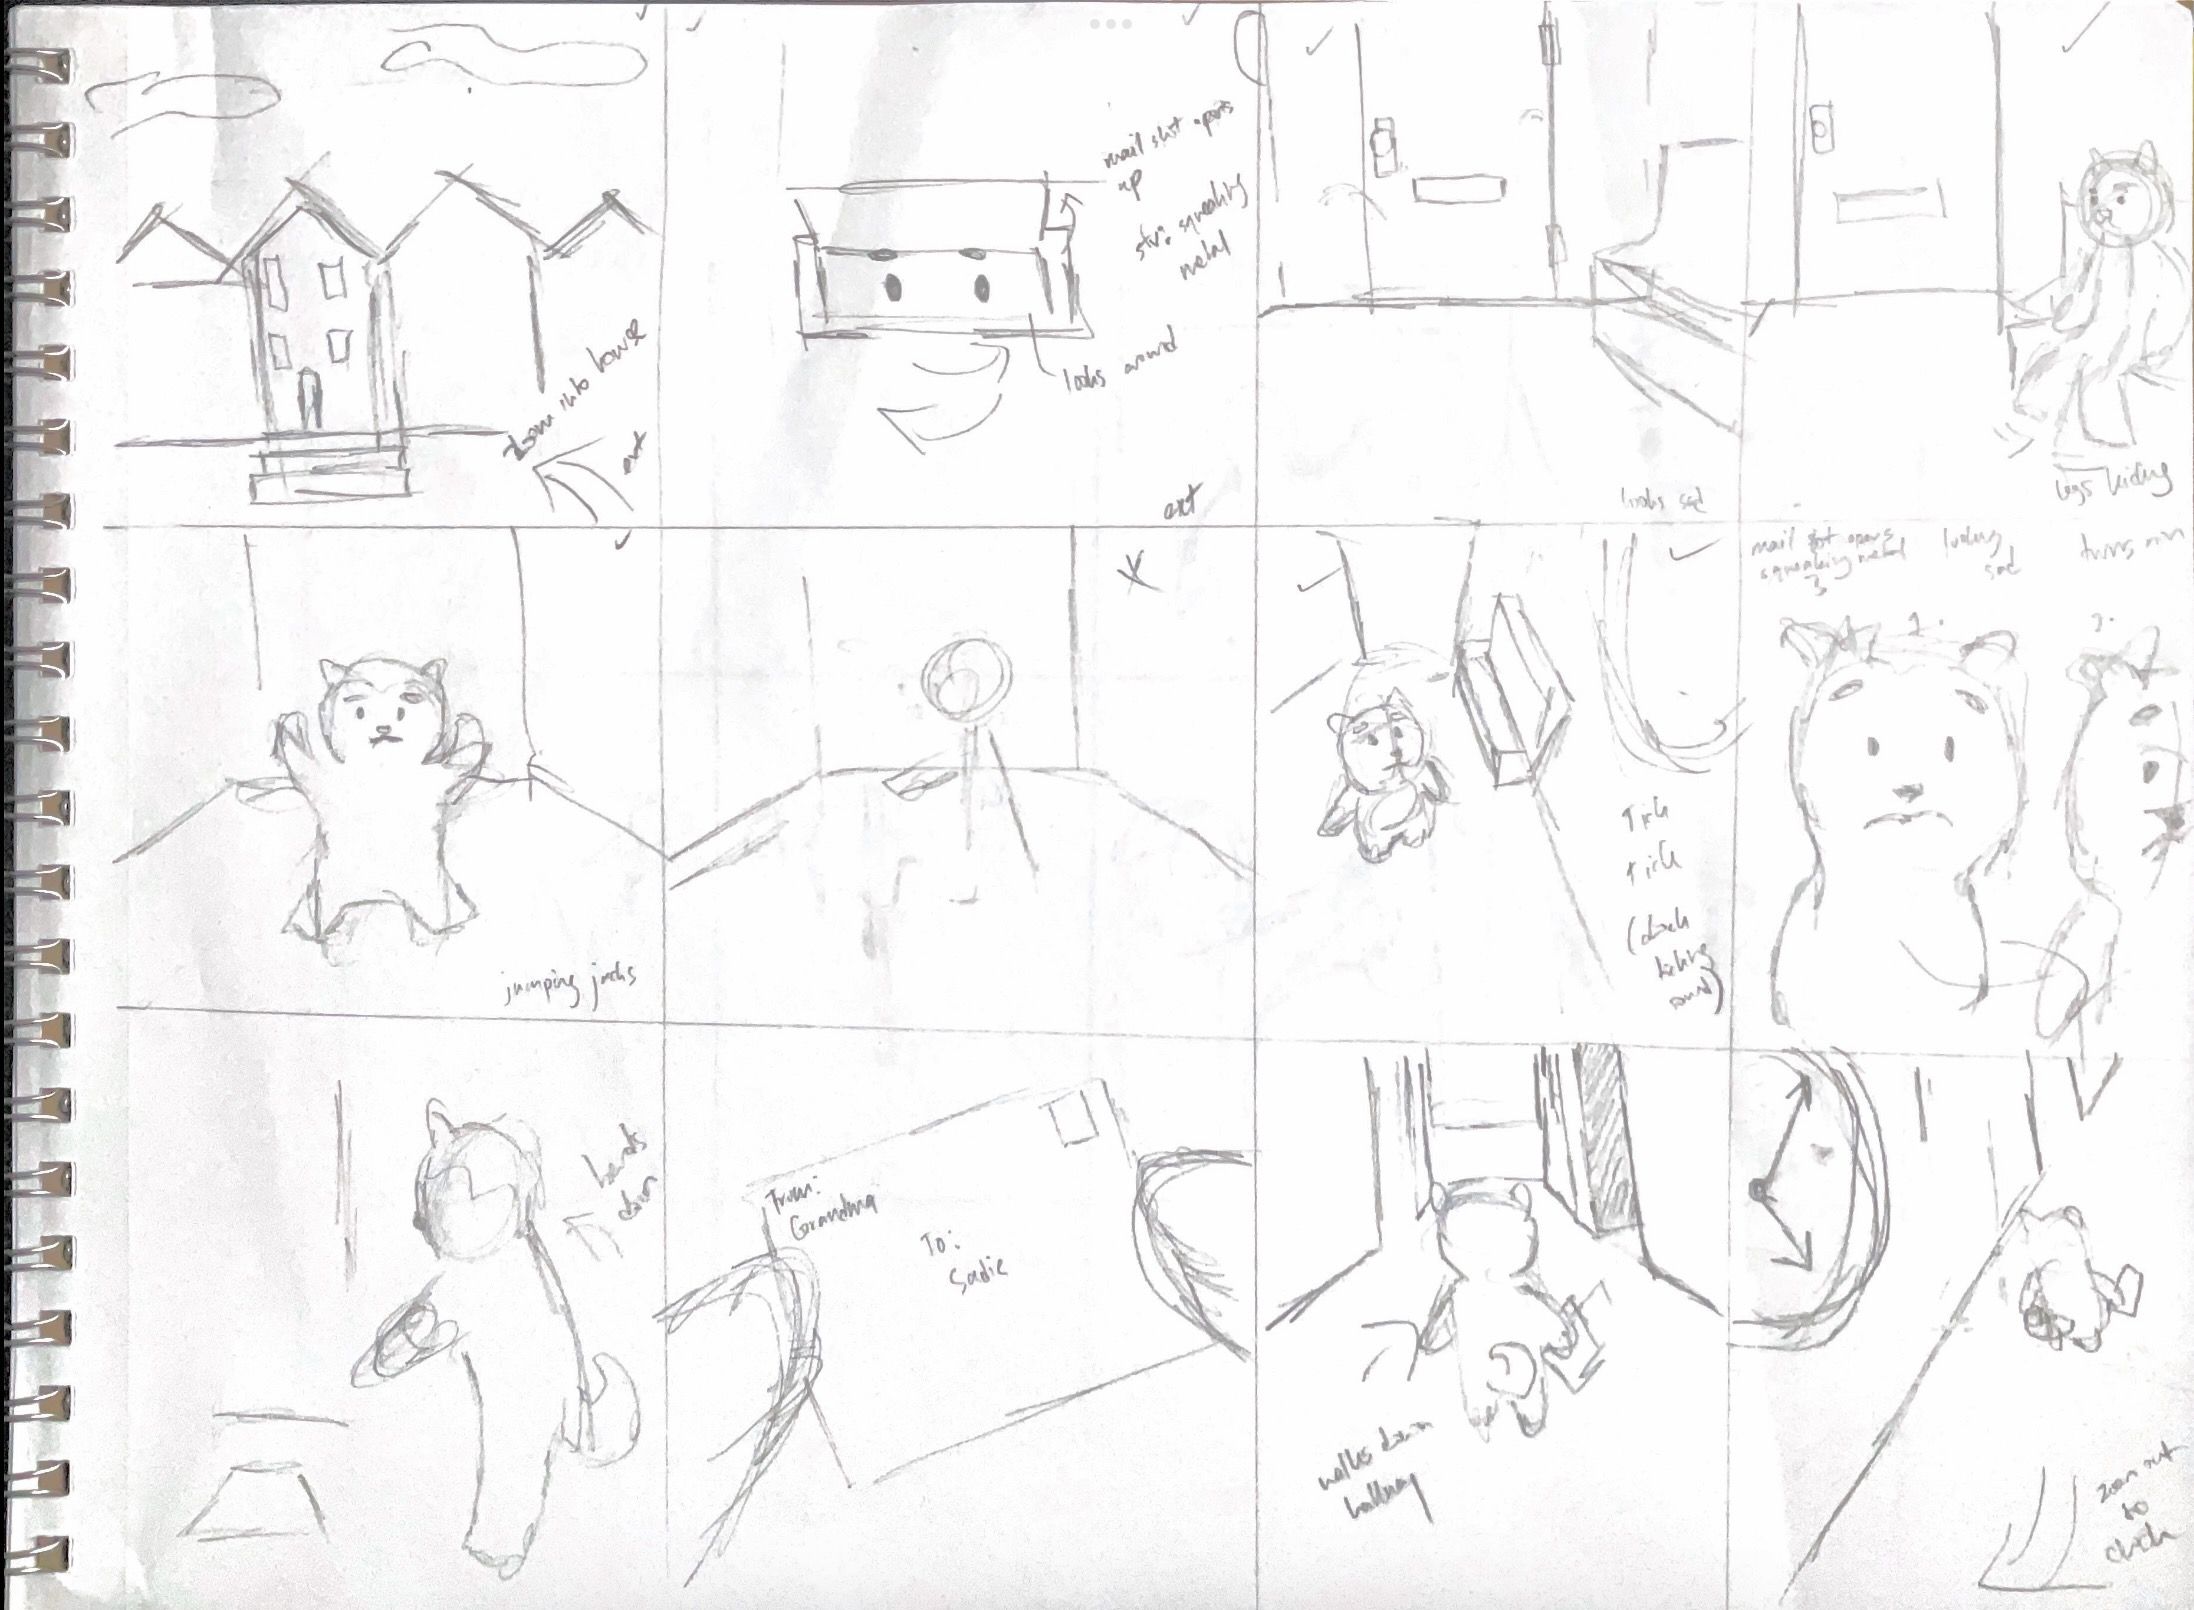 Storyboard for the wait